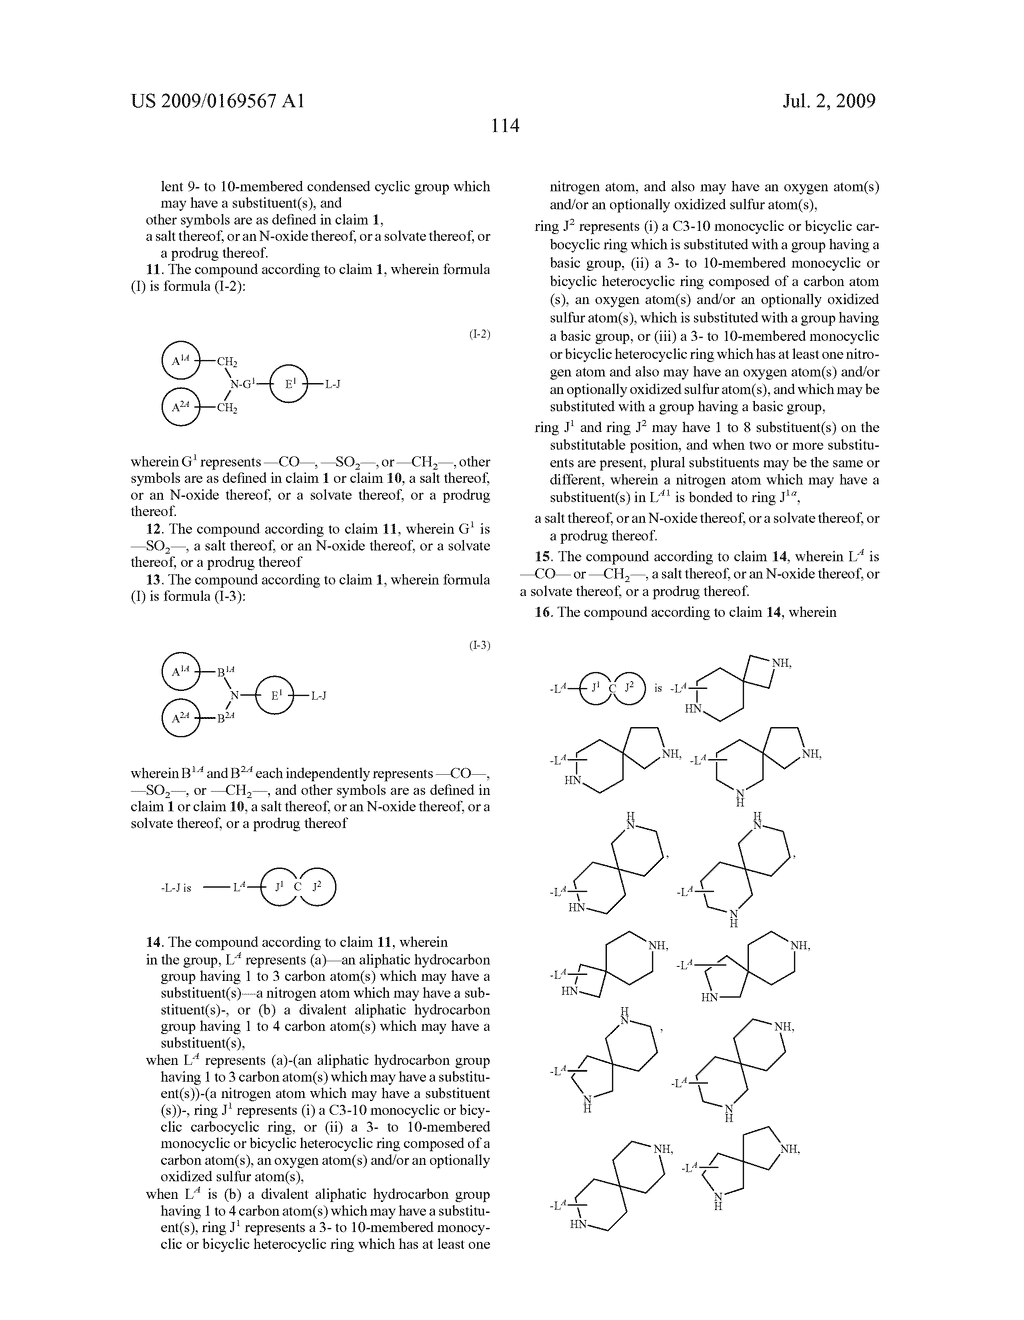 BASIC GROUP-CONTAINING COMPOUND AND USE THEREOF - diagram, schematic, and image 115